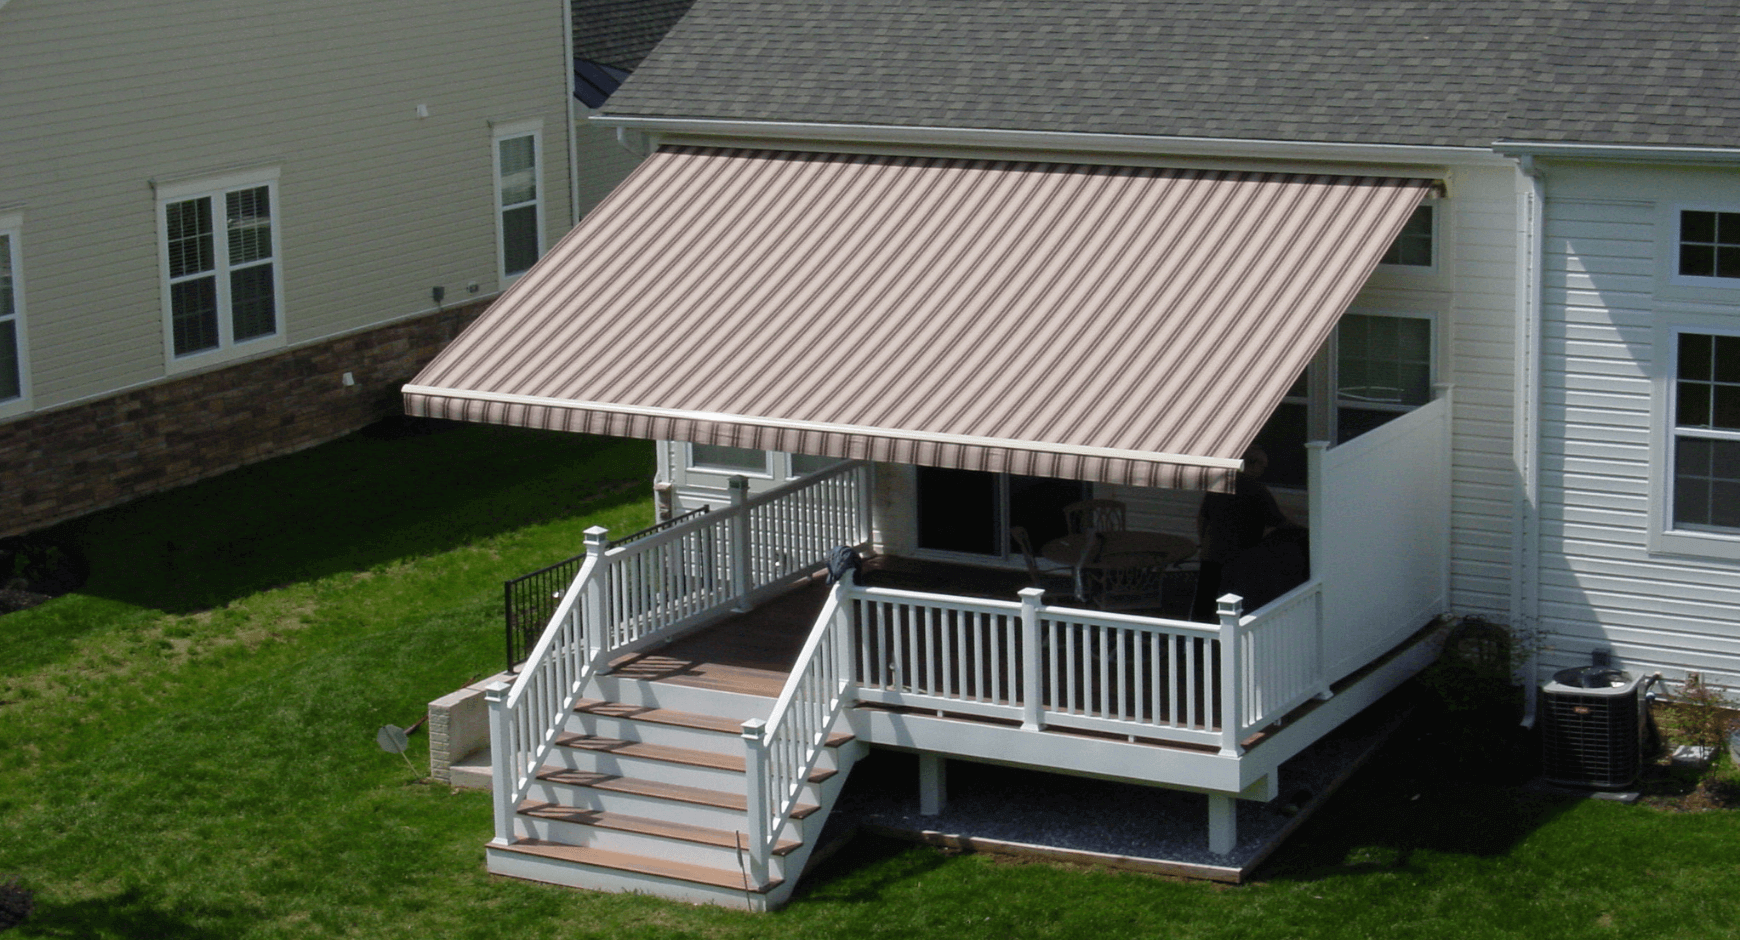 Bird's eye view of a retractable awning